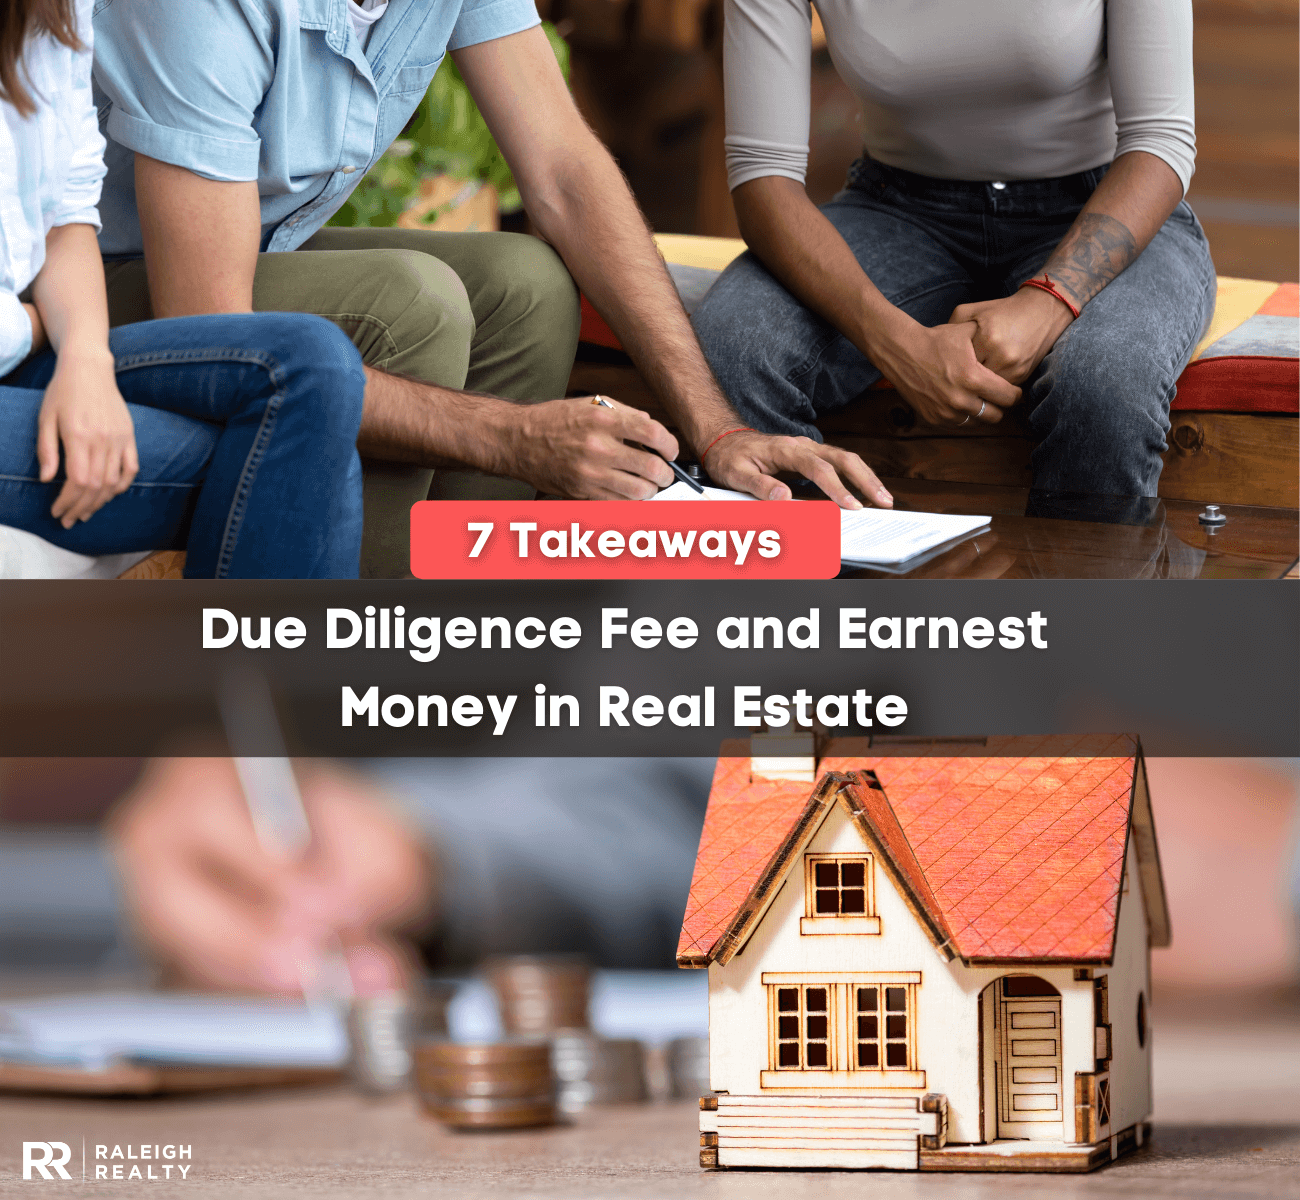 Due Diligence and Earnest Money in Real Estate